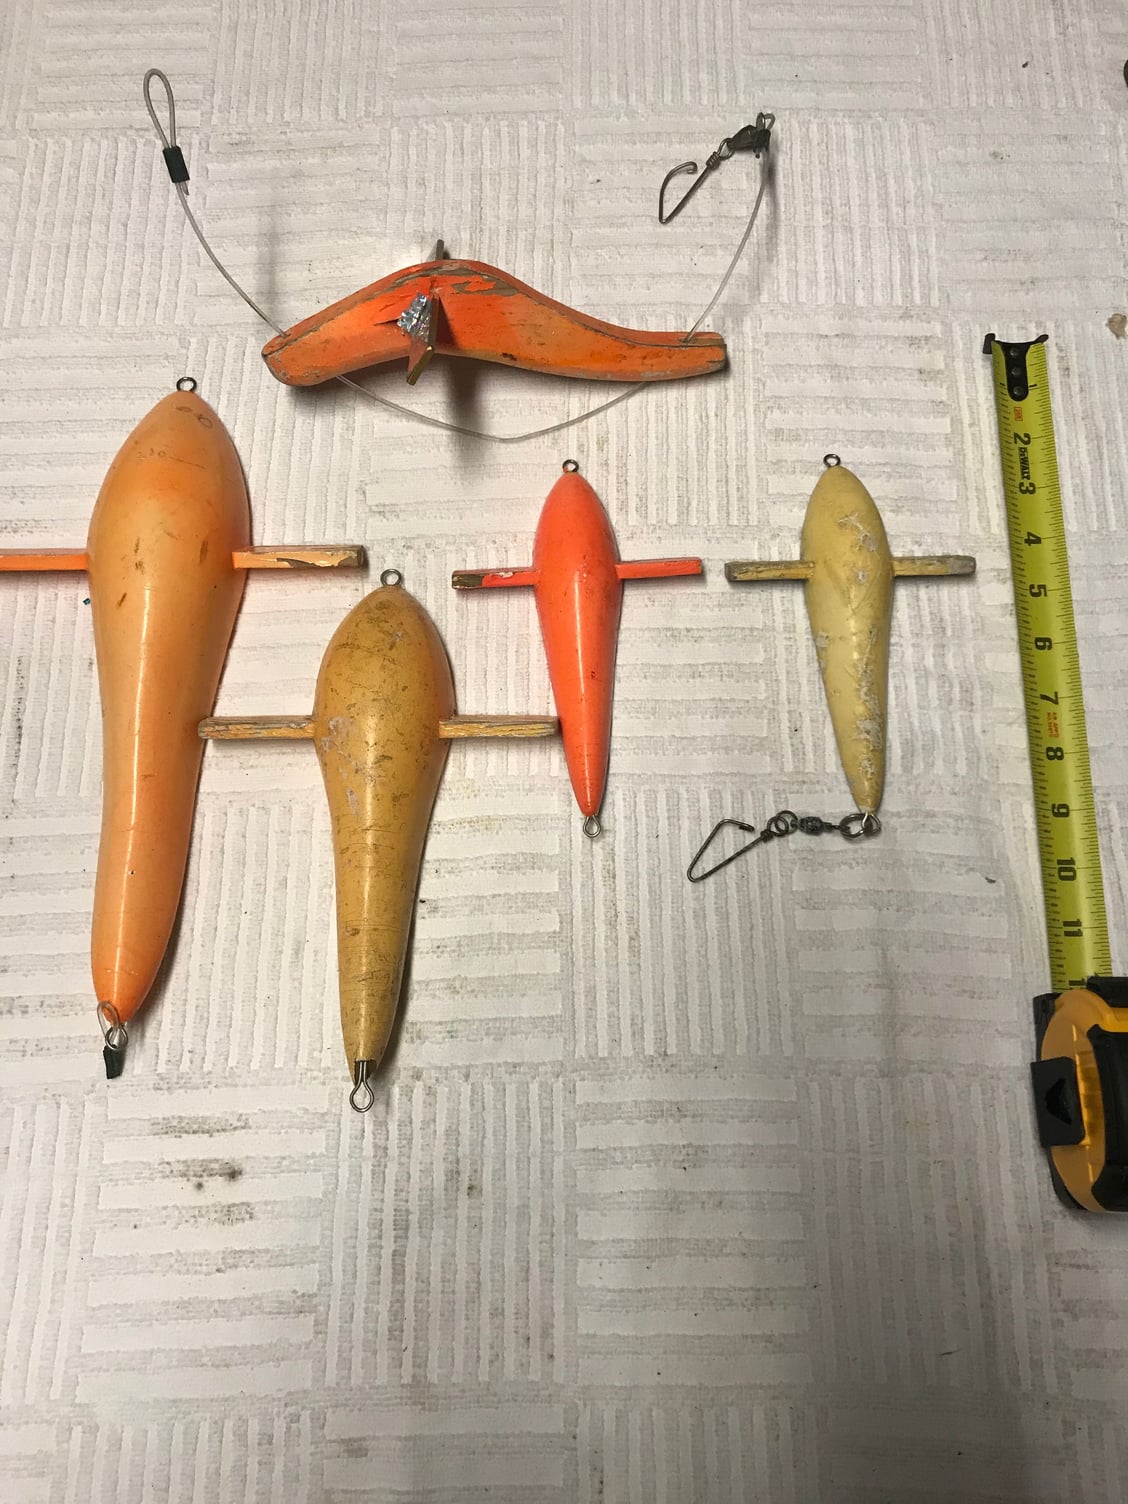 Big game trolling lures - The Hull Truth - Boating and Fishing Forum